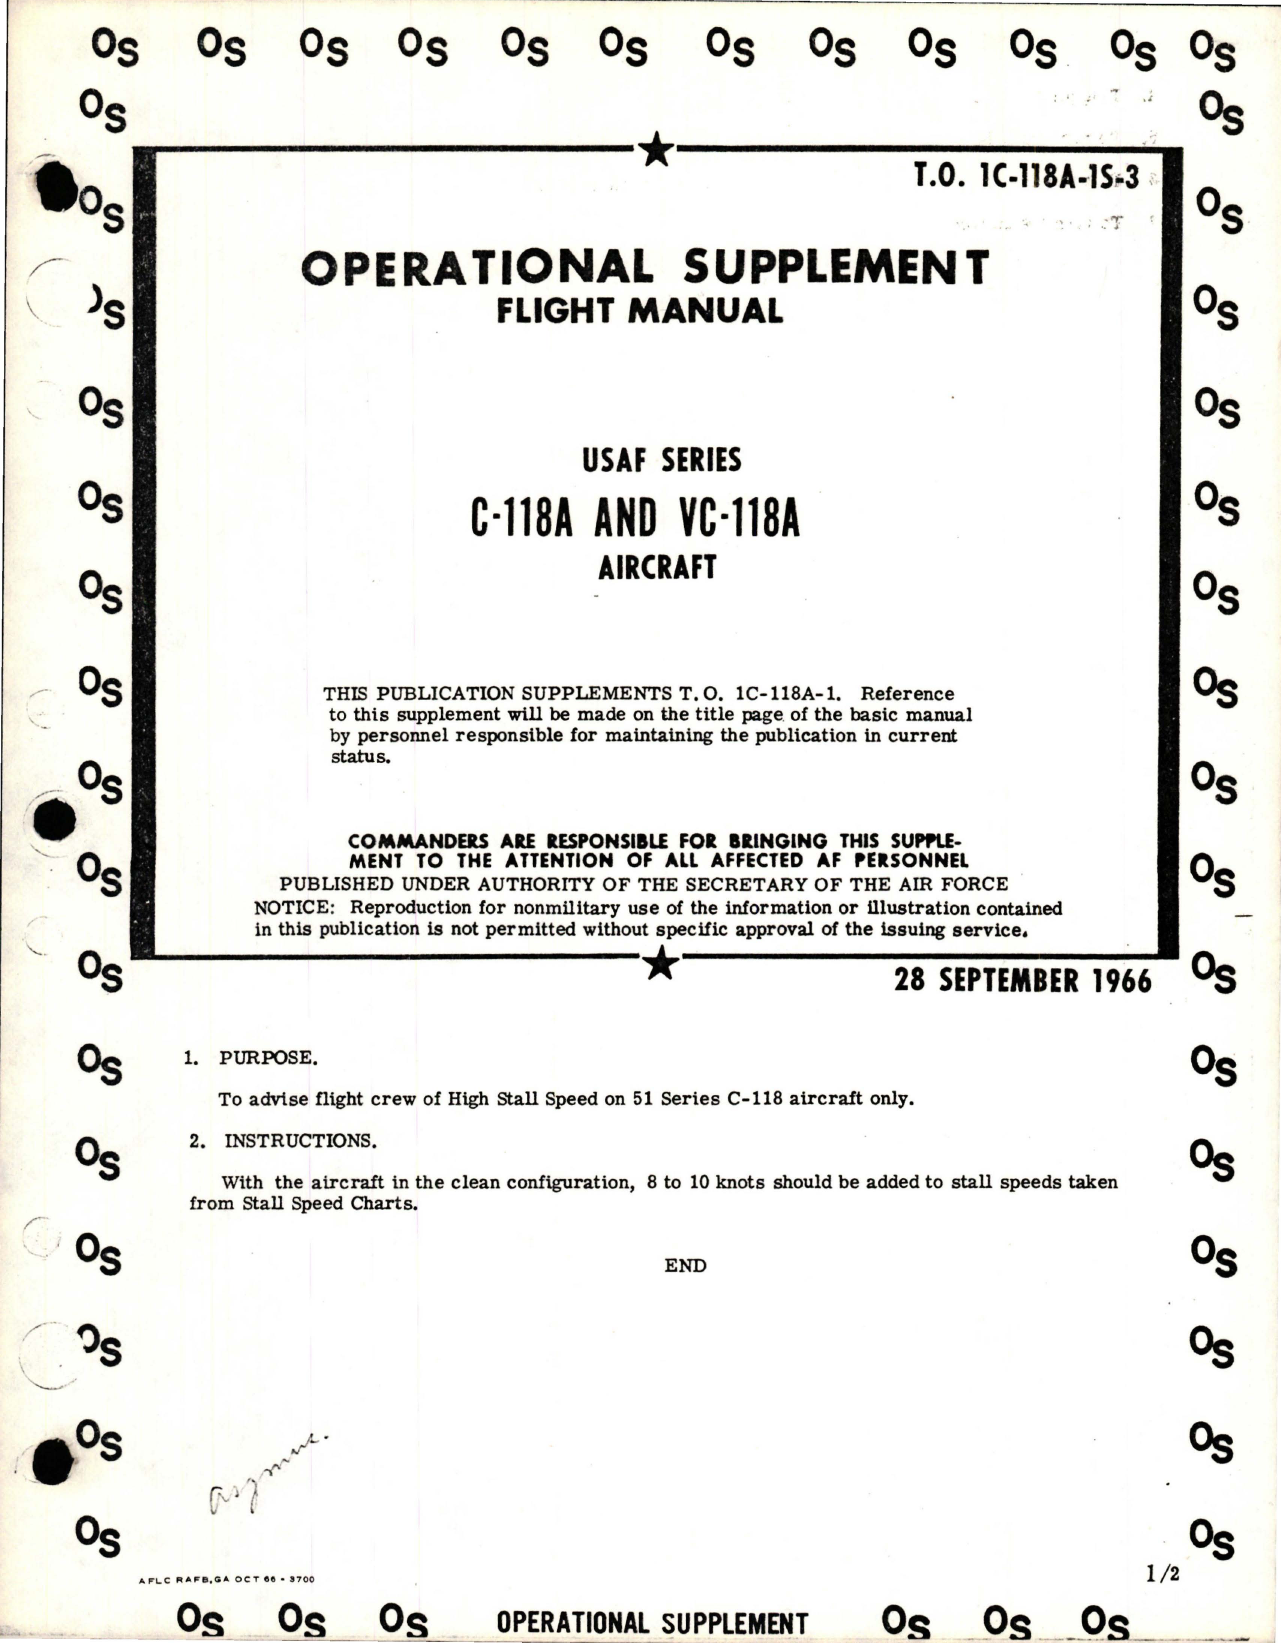 Sample page 1 from AirCorps Library document: Operational Supplement to Flight Manual for C-118A and VC-118A